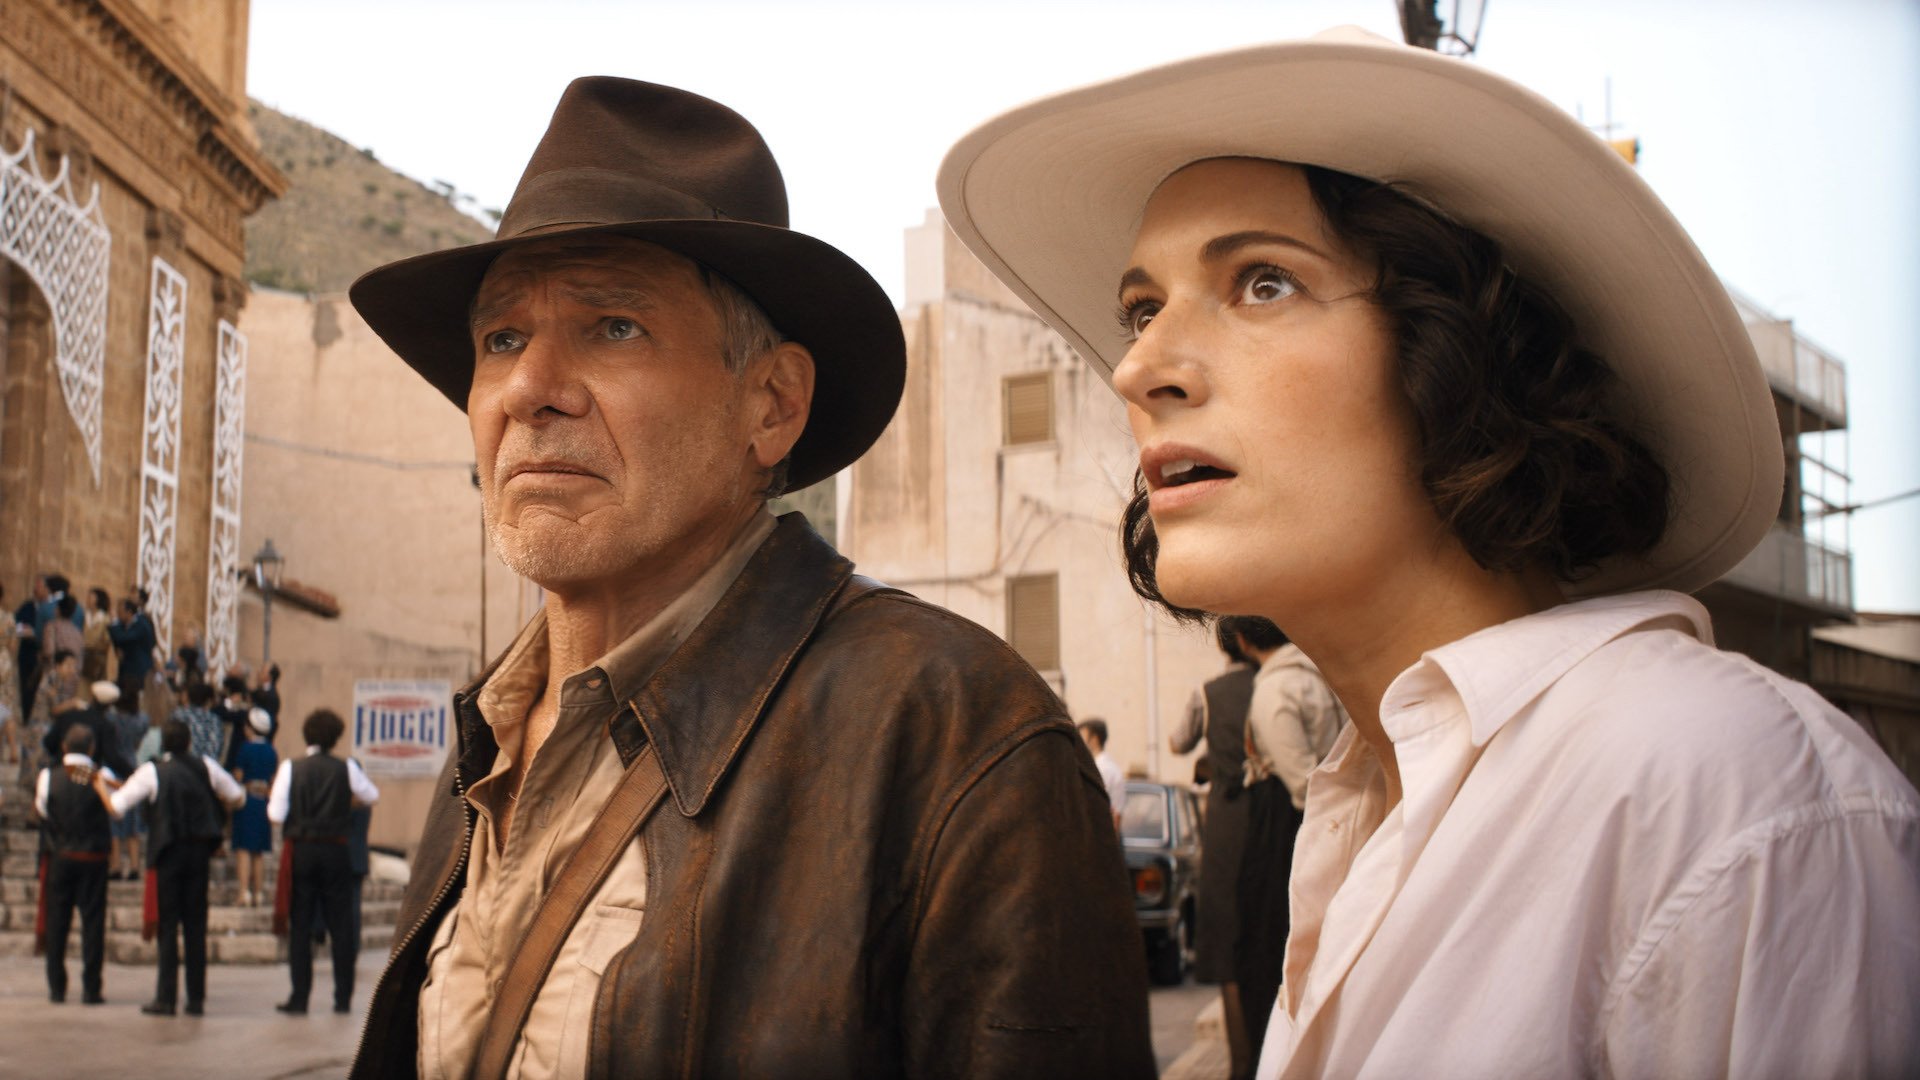 Indiana Jones (Harrison Ford) and Helena (Phoebe Waller-Bridge) stand in a street in 